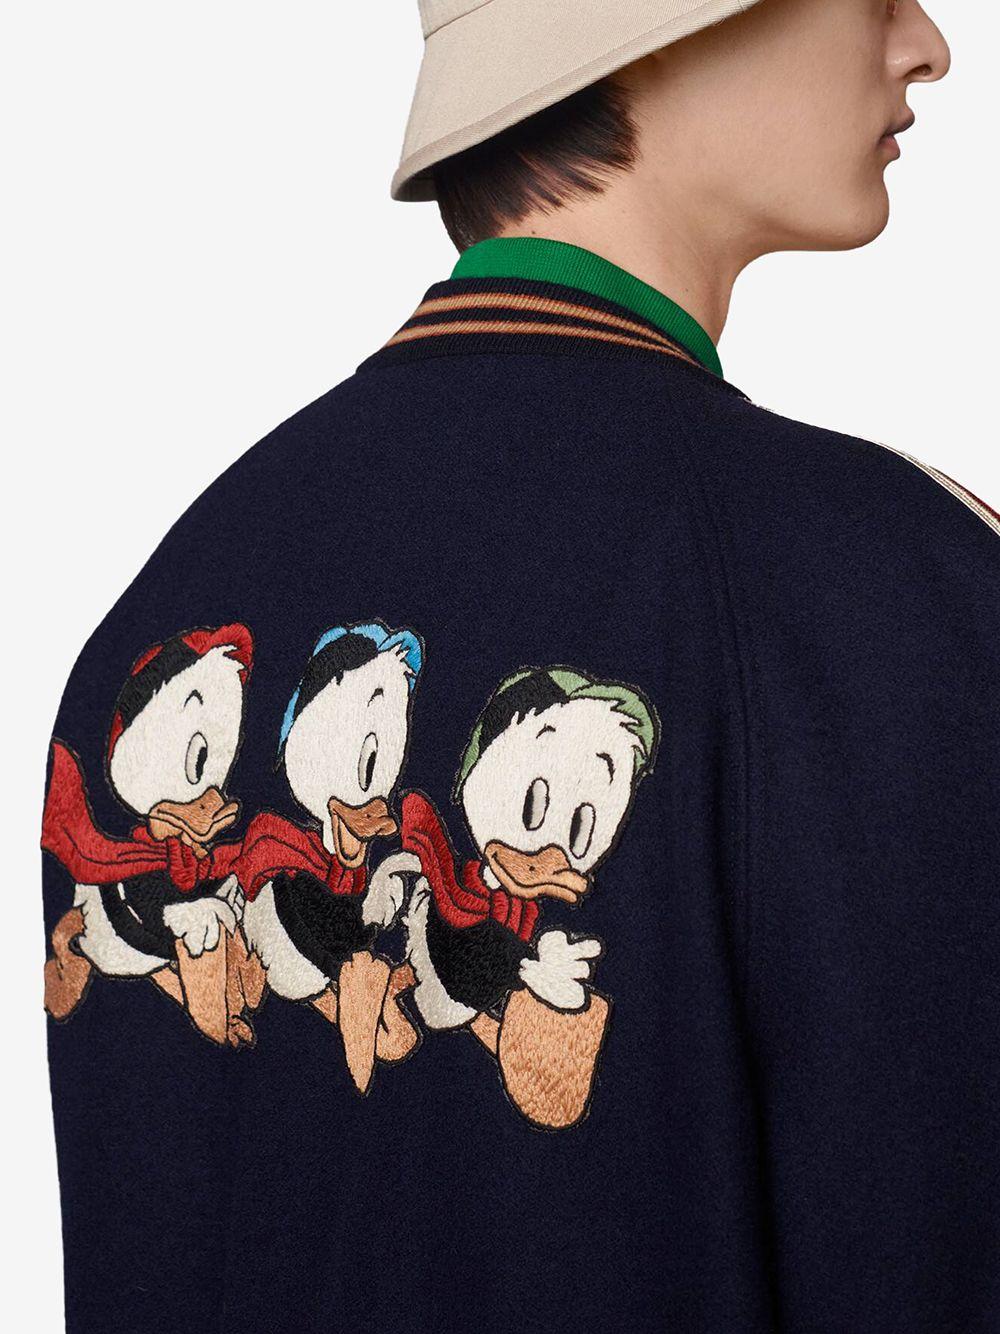 Gucci X Disney Donald Duck-print Bomber Jacket in Blue for Men | Lyst